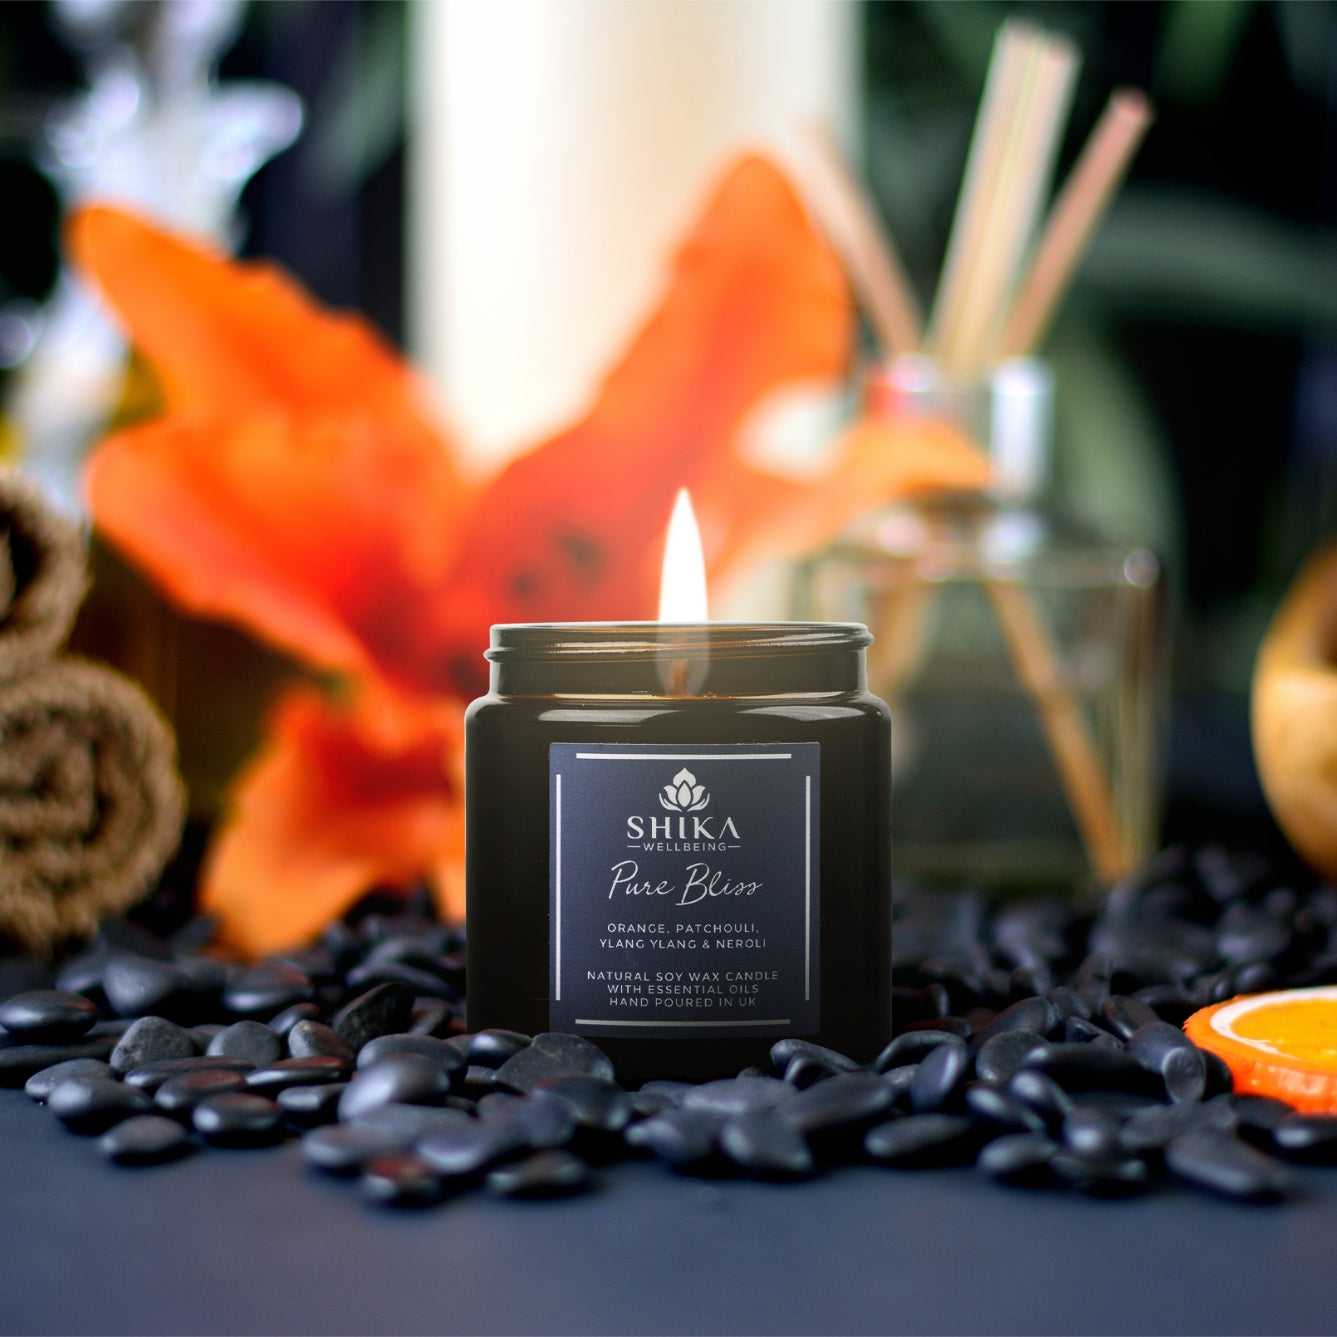 Image of a Shika Wellbeing Pure Bliss candle surrounded by stones. In the background there is an orange flower, a reed diffuser and a slice of orange